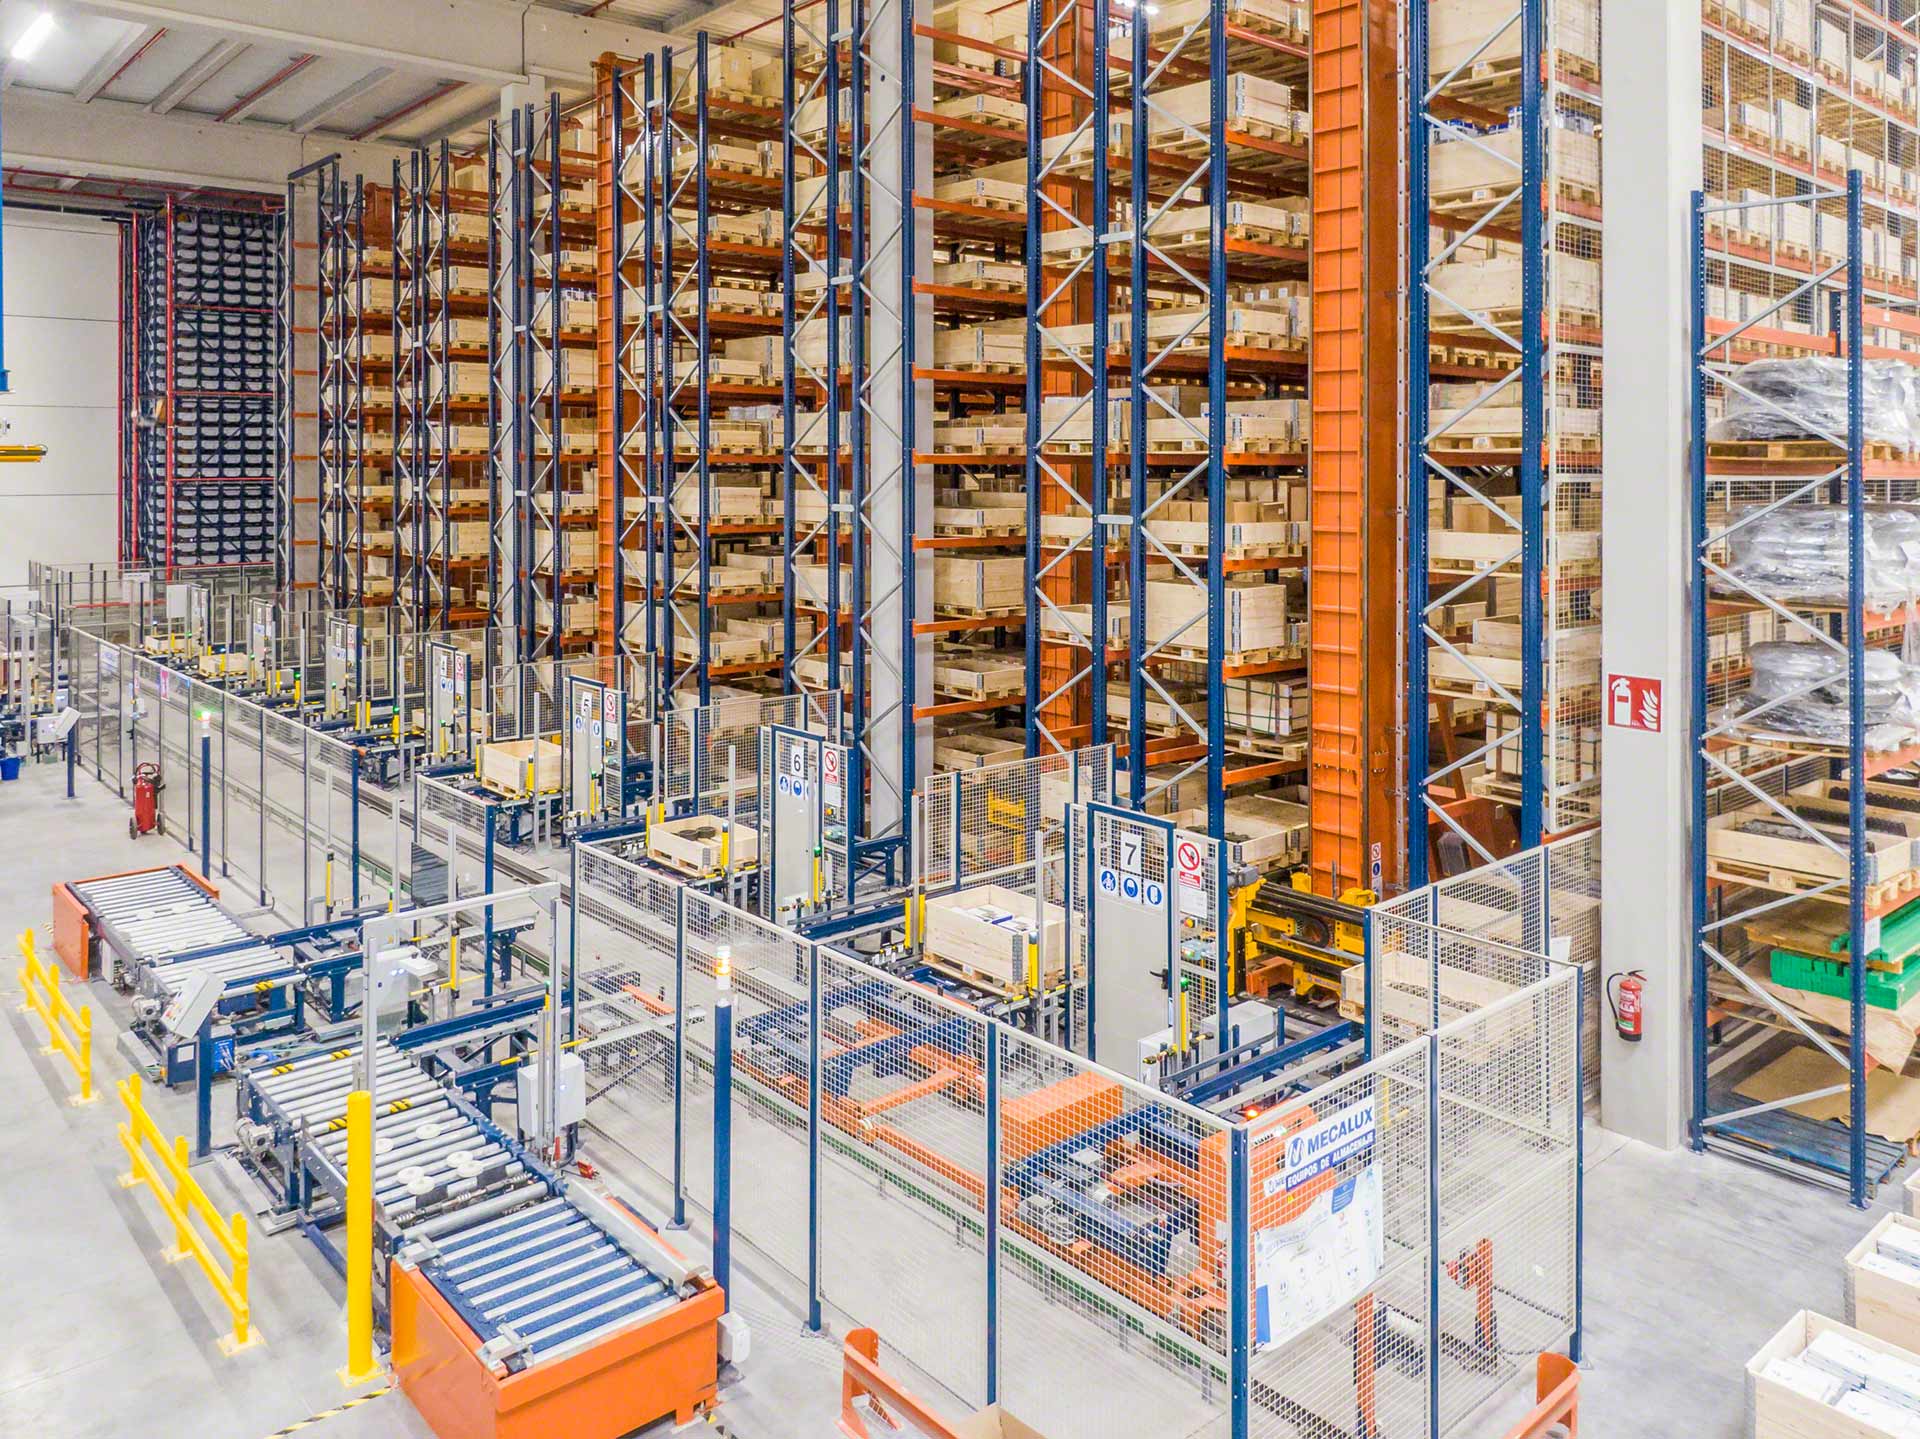 Advantages of automated storage and retrieval systems